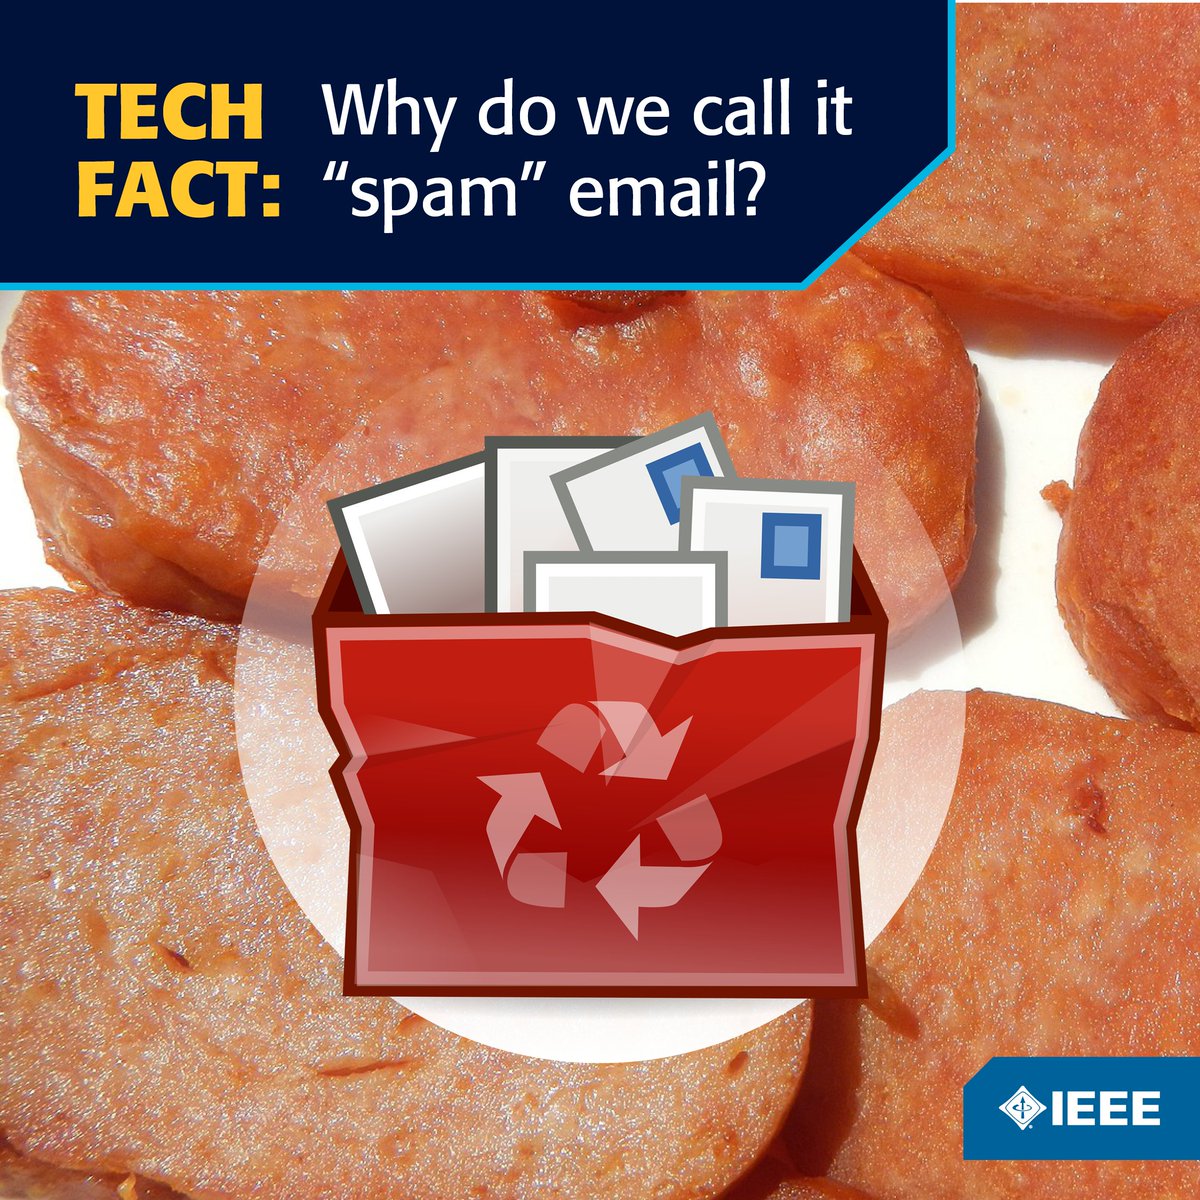 The term “spam” email was inspired by a sketch from Monty Python’s Flying Circus featuring Vikings whose loud, incessant chants about Spam, the canned meat, drowned out other conversations—much like spam emails are a seemingly never-ending nuisance in our inboxes.